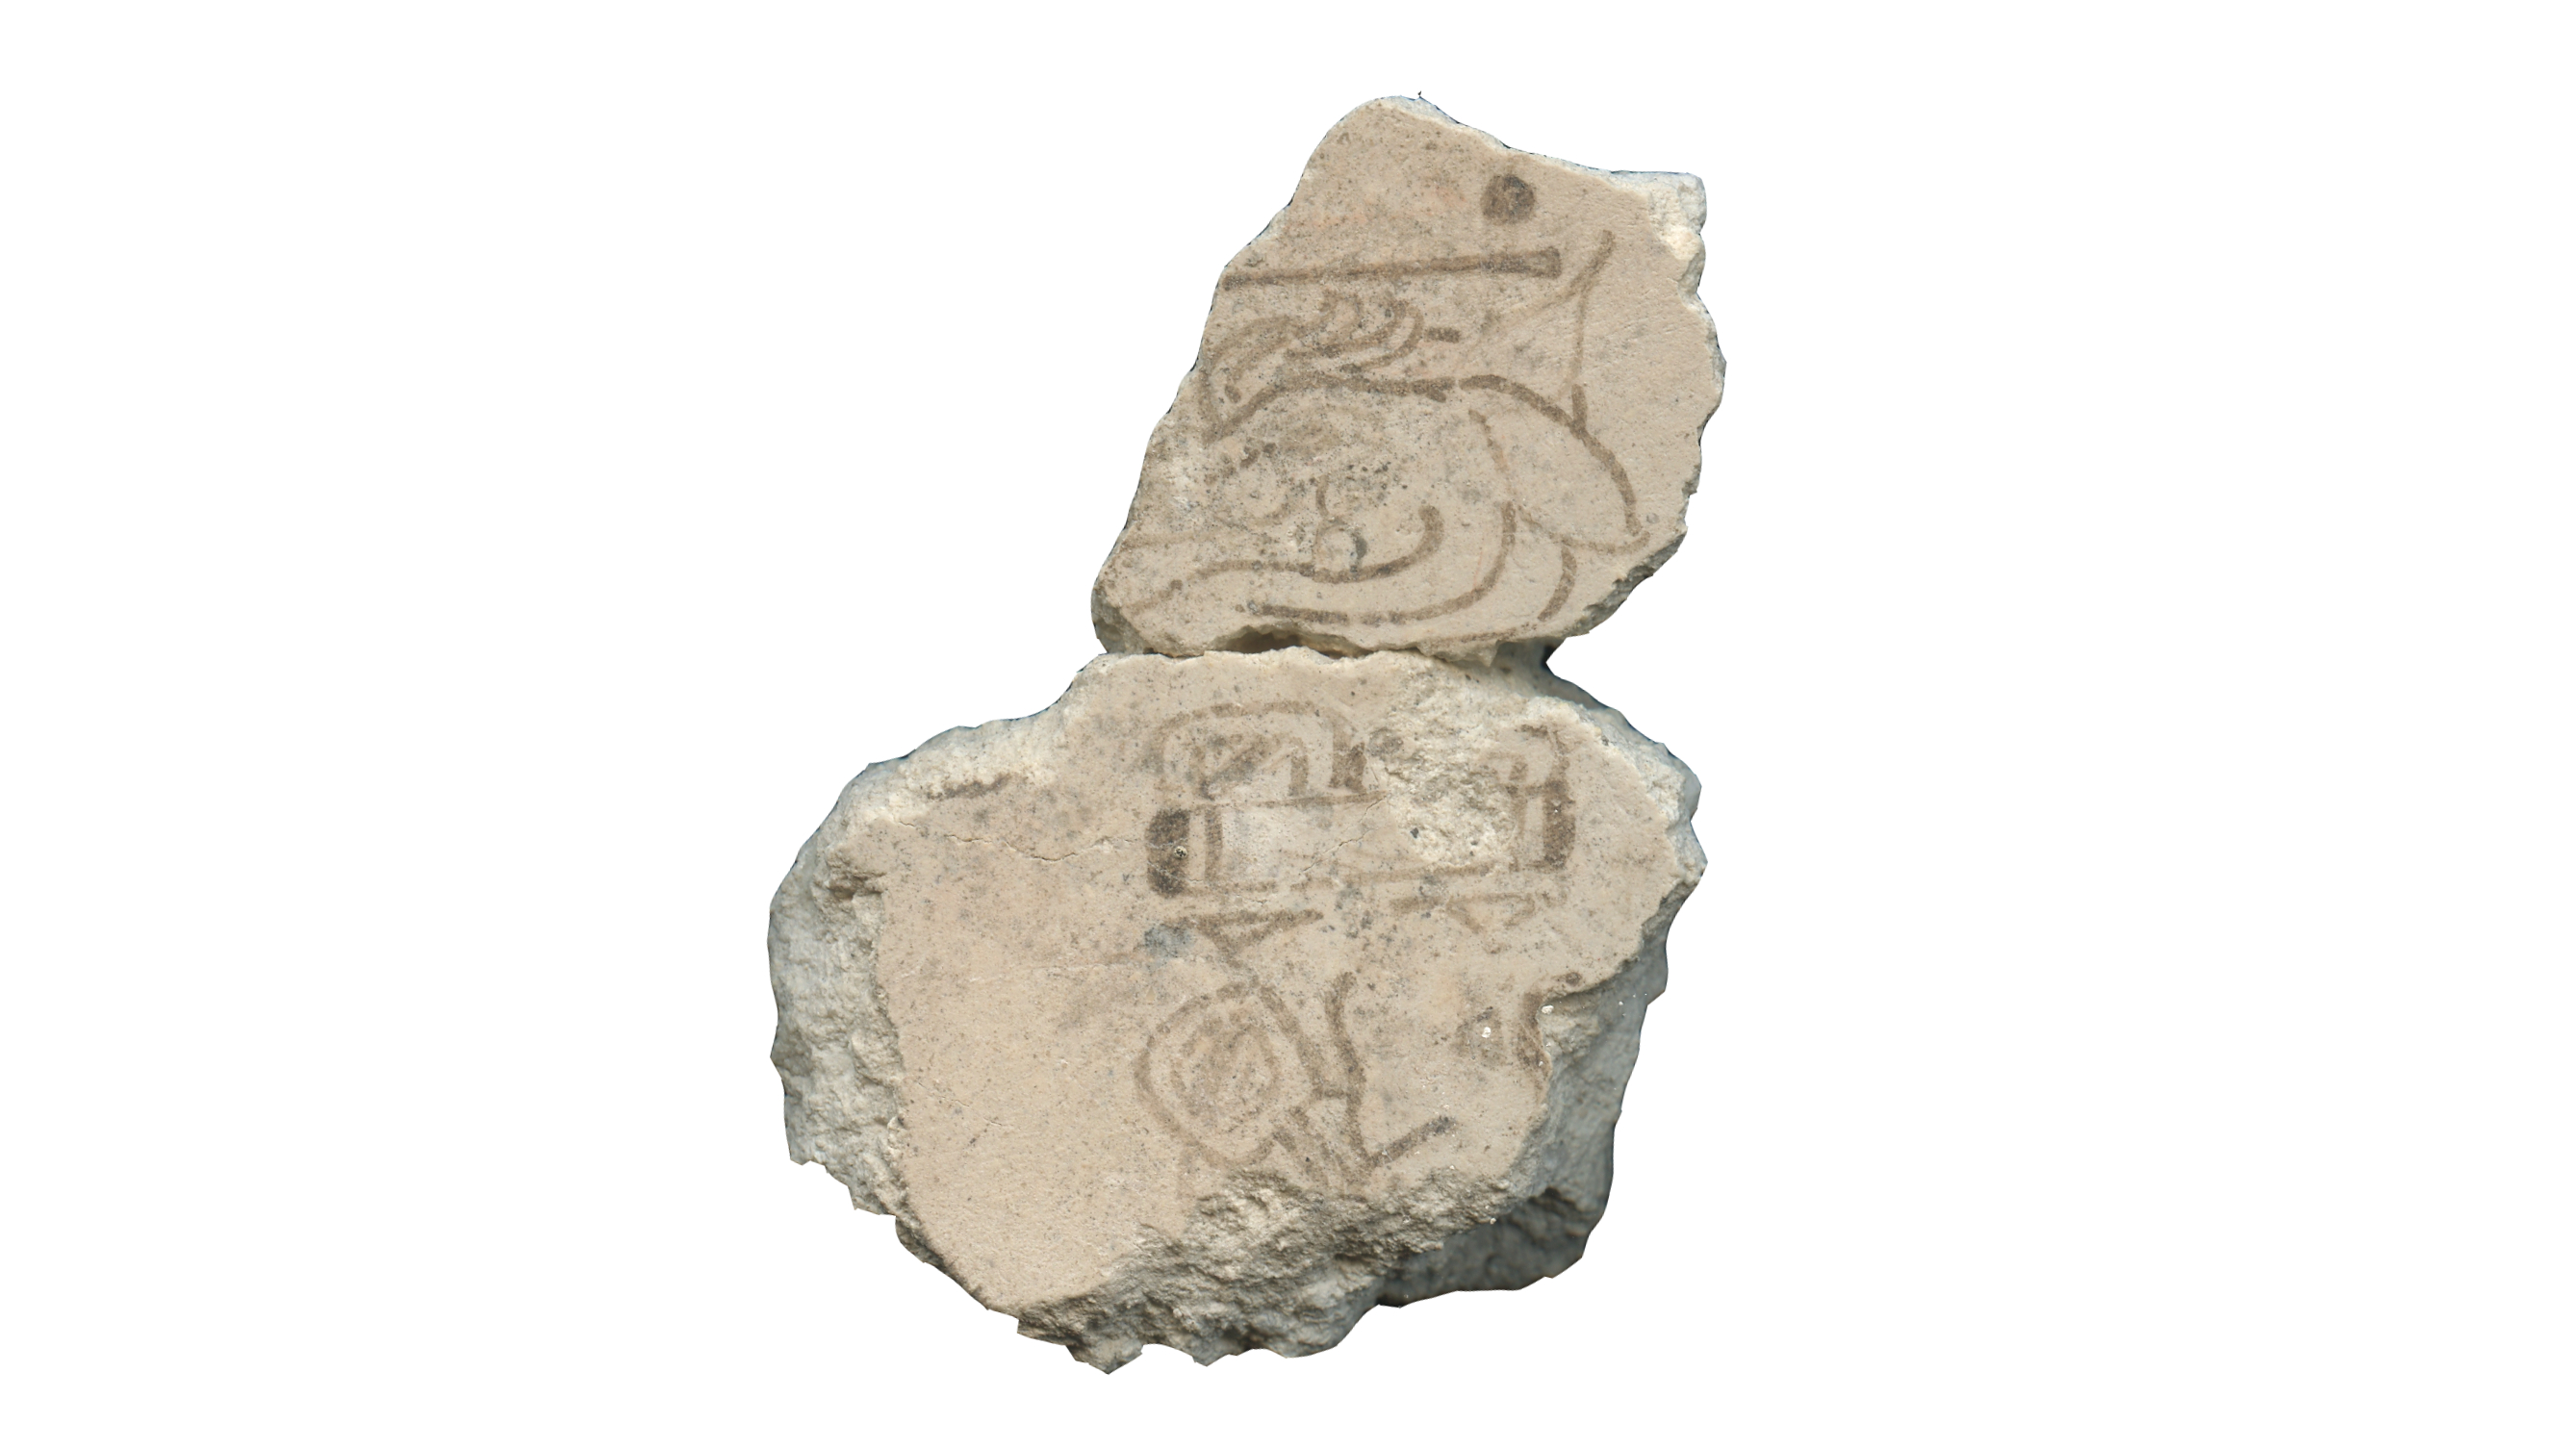 Detail of fragment #4778 collected from the Sub-V phase (~300-200 BC), showing the 7 stag day mark.